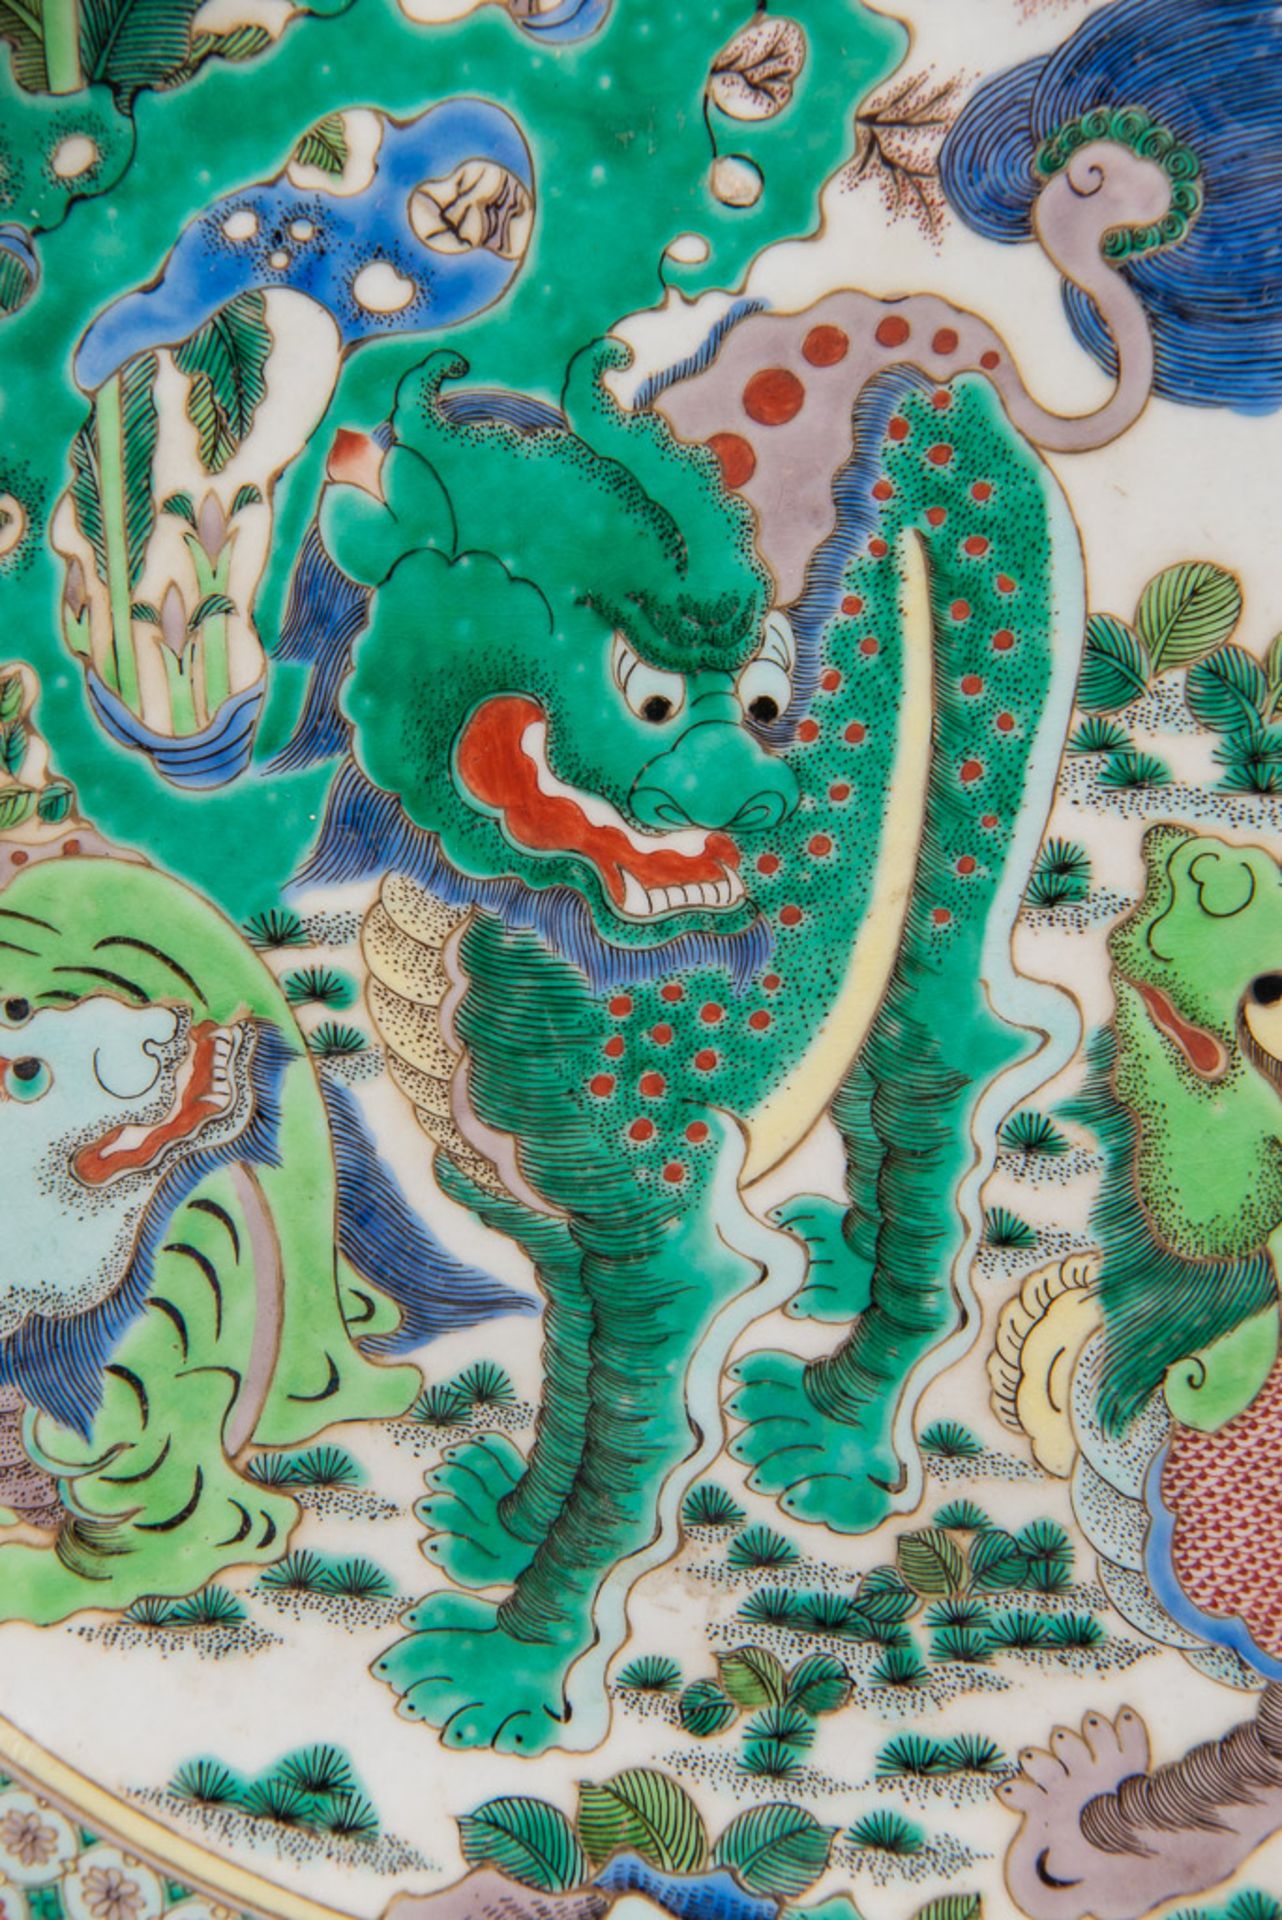 Display plate Wucai with dragons - Image 5 of 12